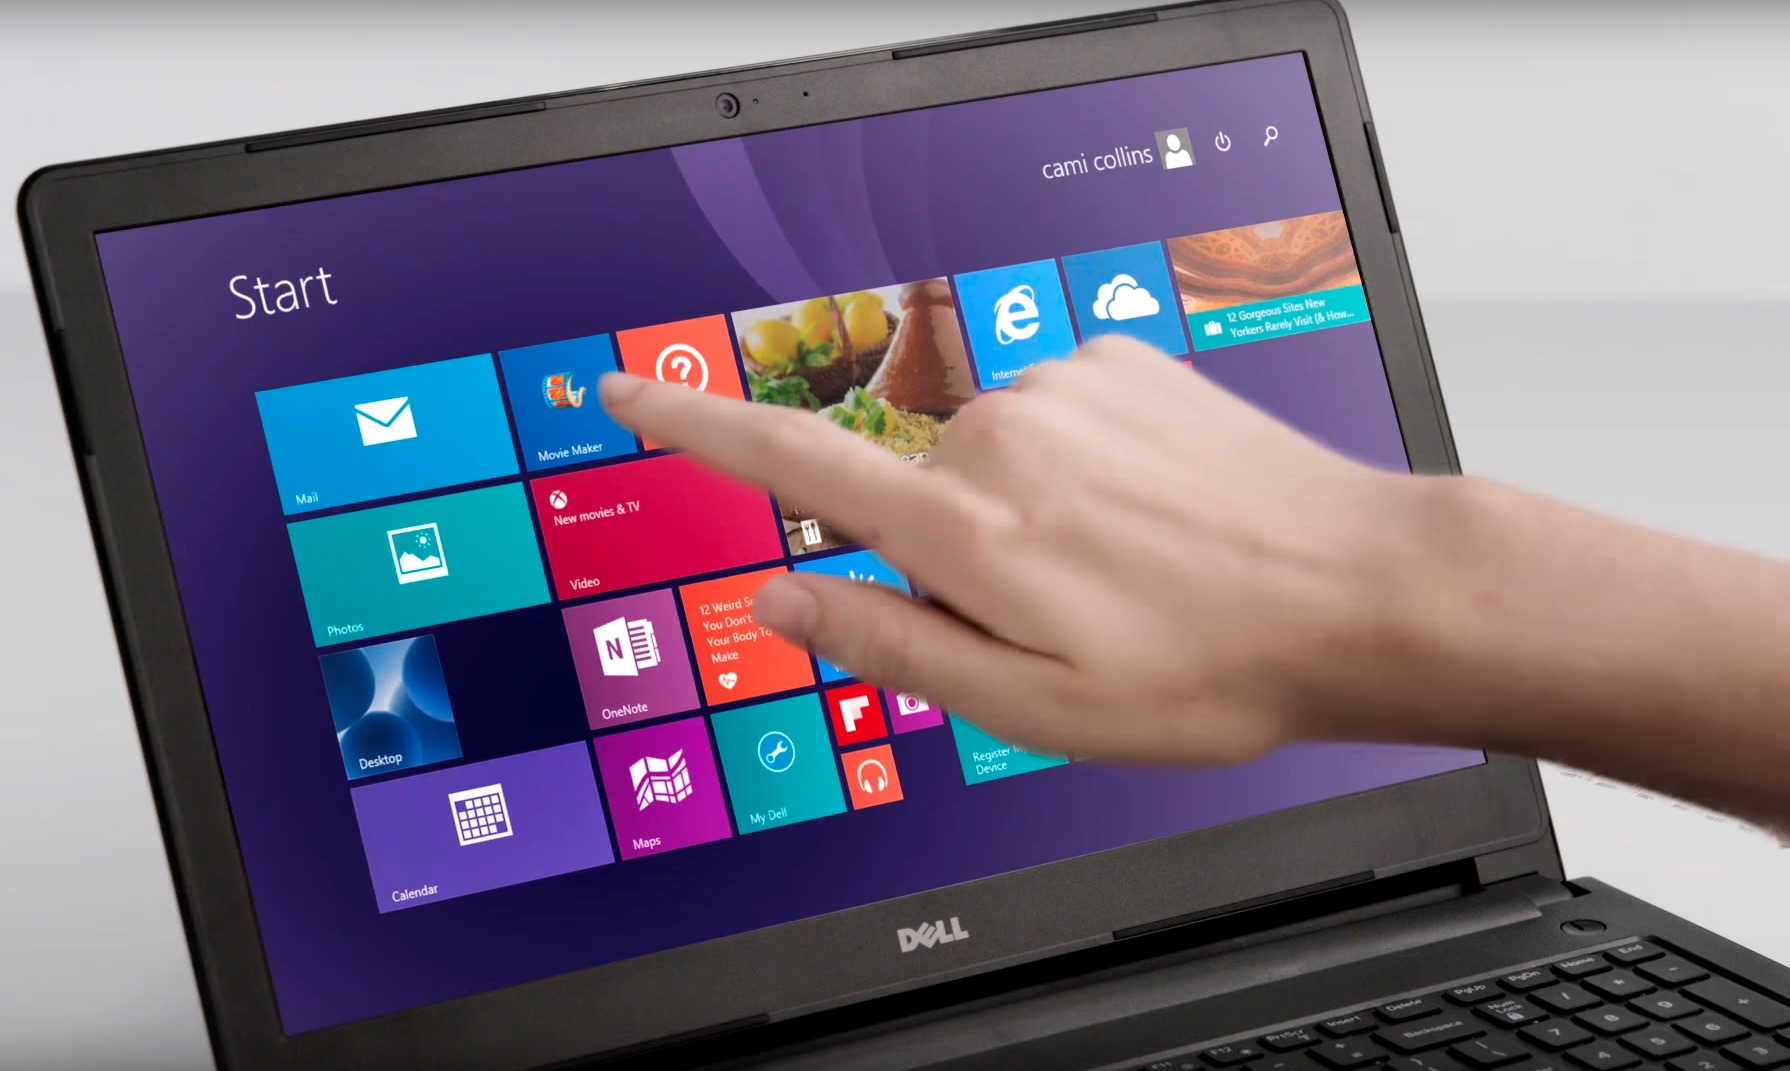 How To Screen Record On Dell Laptop